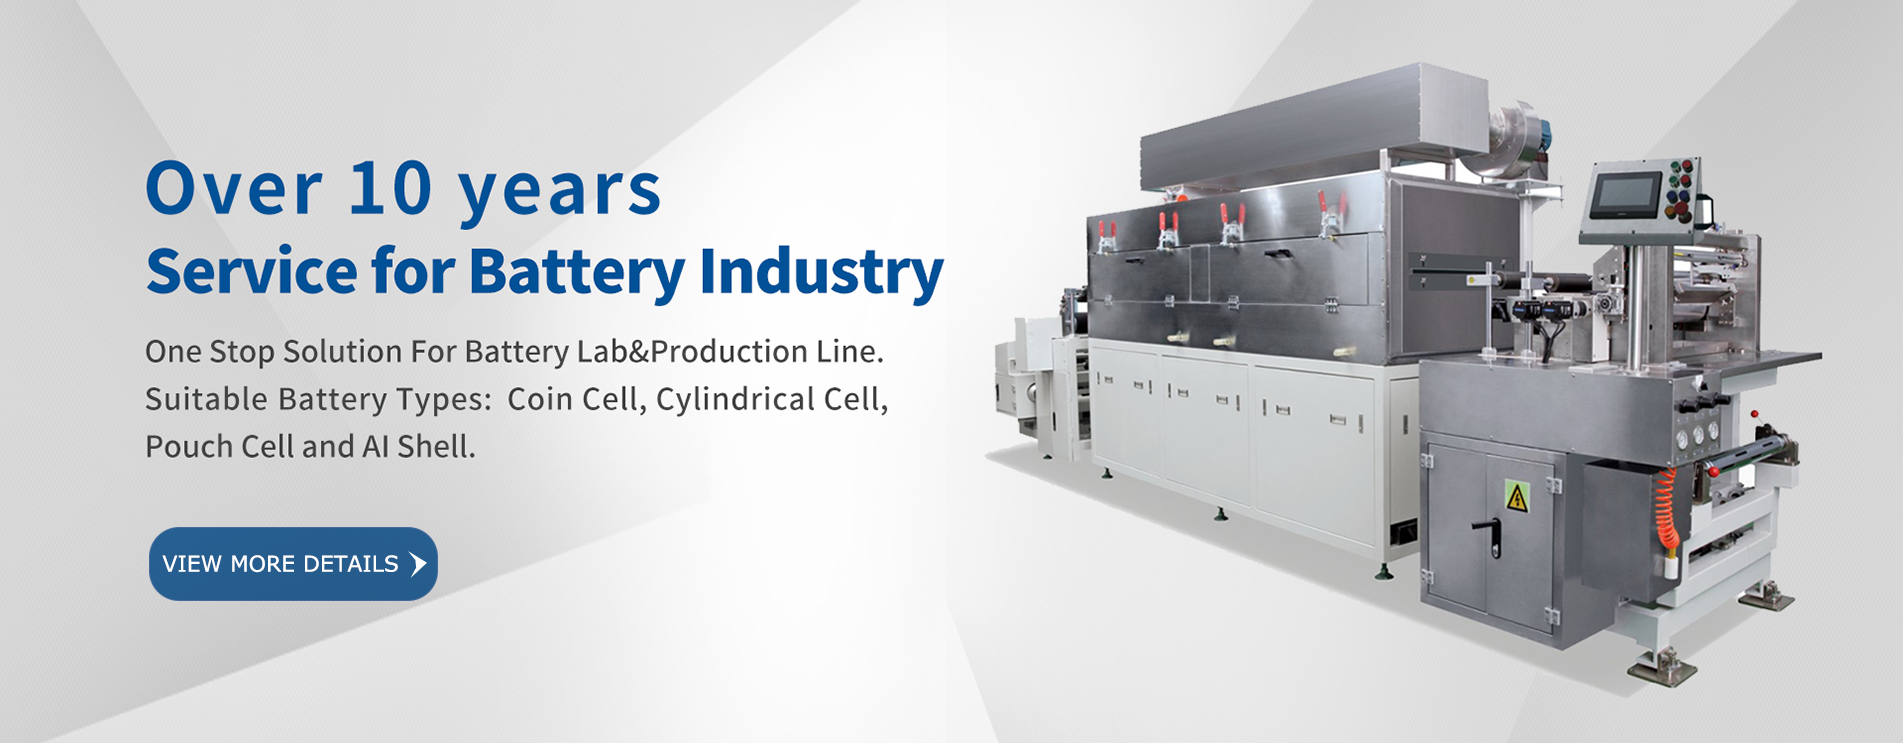 One-Stop Solution For Battery Lab & Production Line